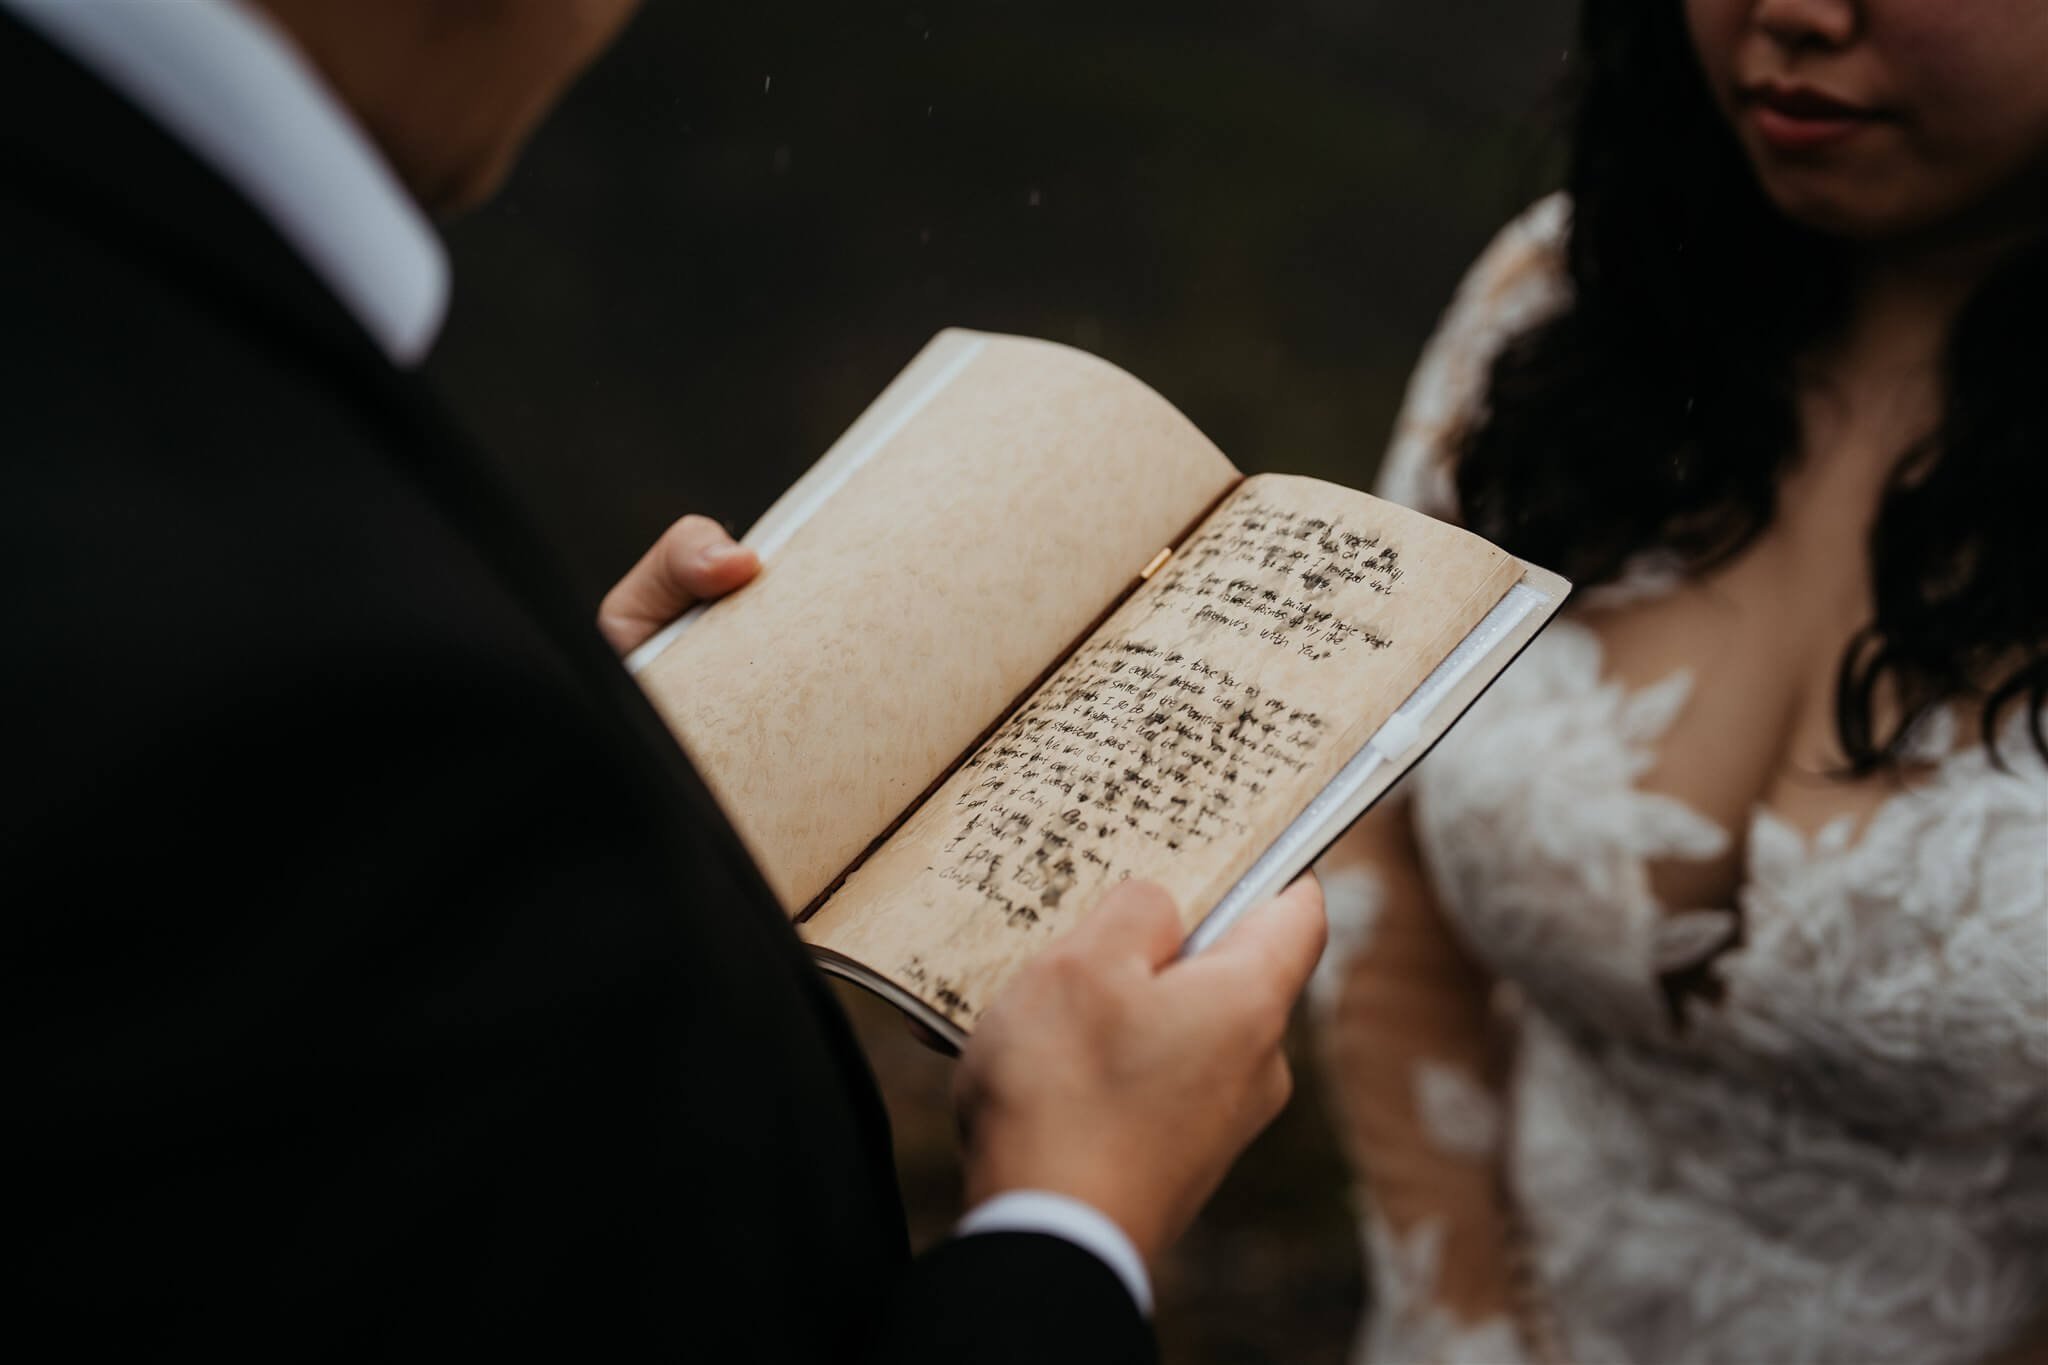 Groom reading personal vows while eloping in Iceland